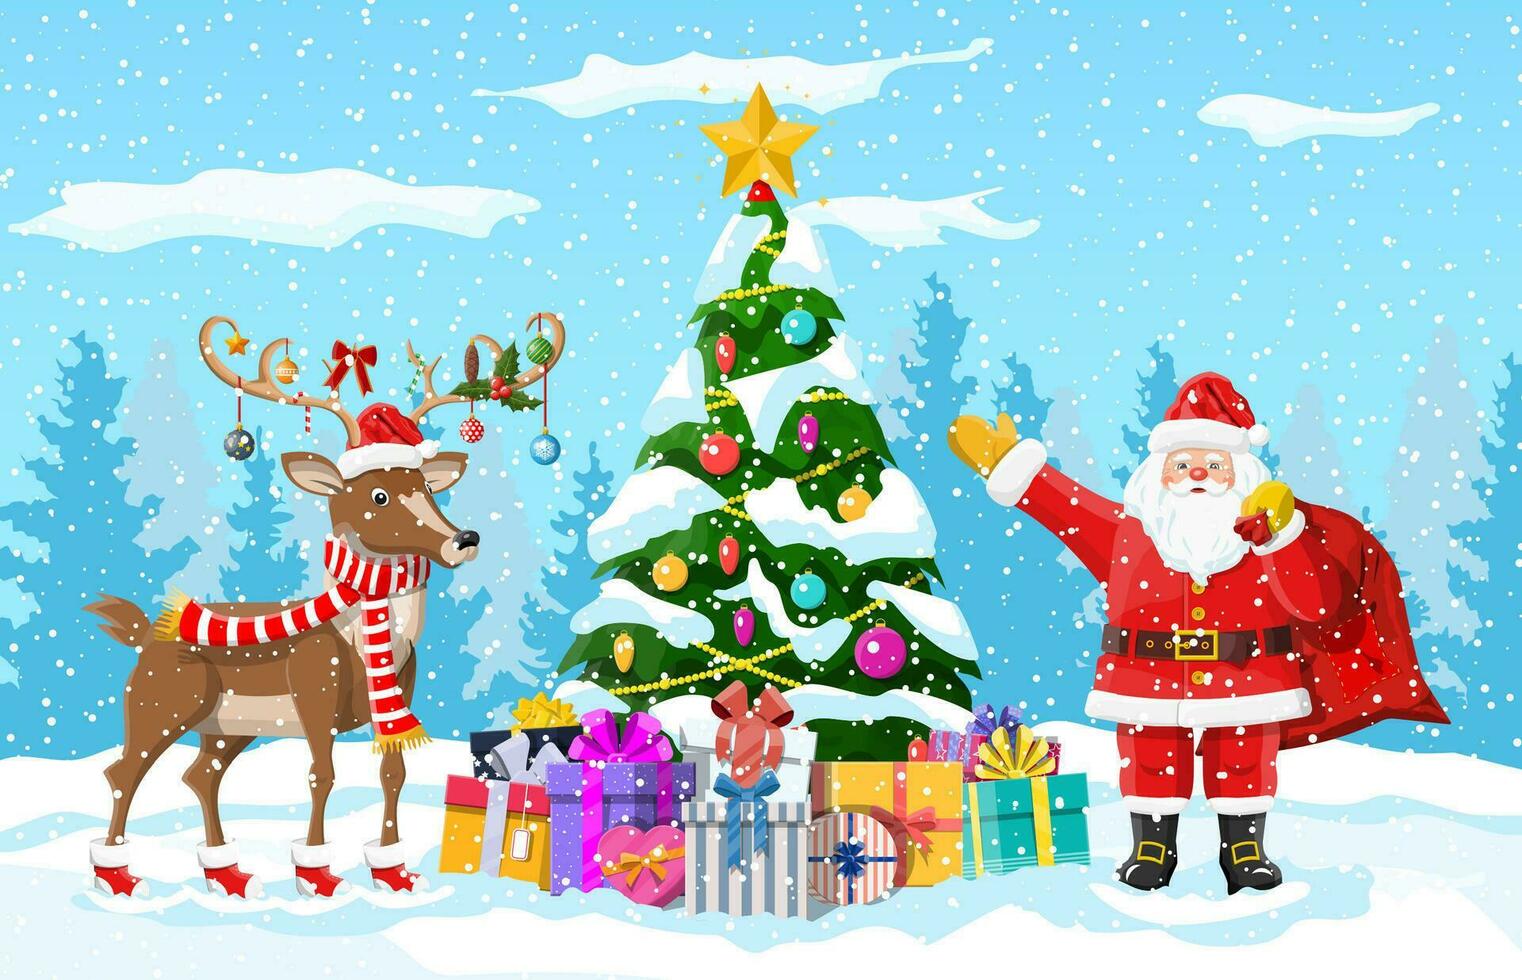 Christmas tree background. Santa claus with reindeer. Winter landscape with fir trees forest and snowing. Happy new year celebration. New year xmas holiday. Vector illustration flat style